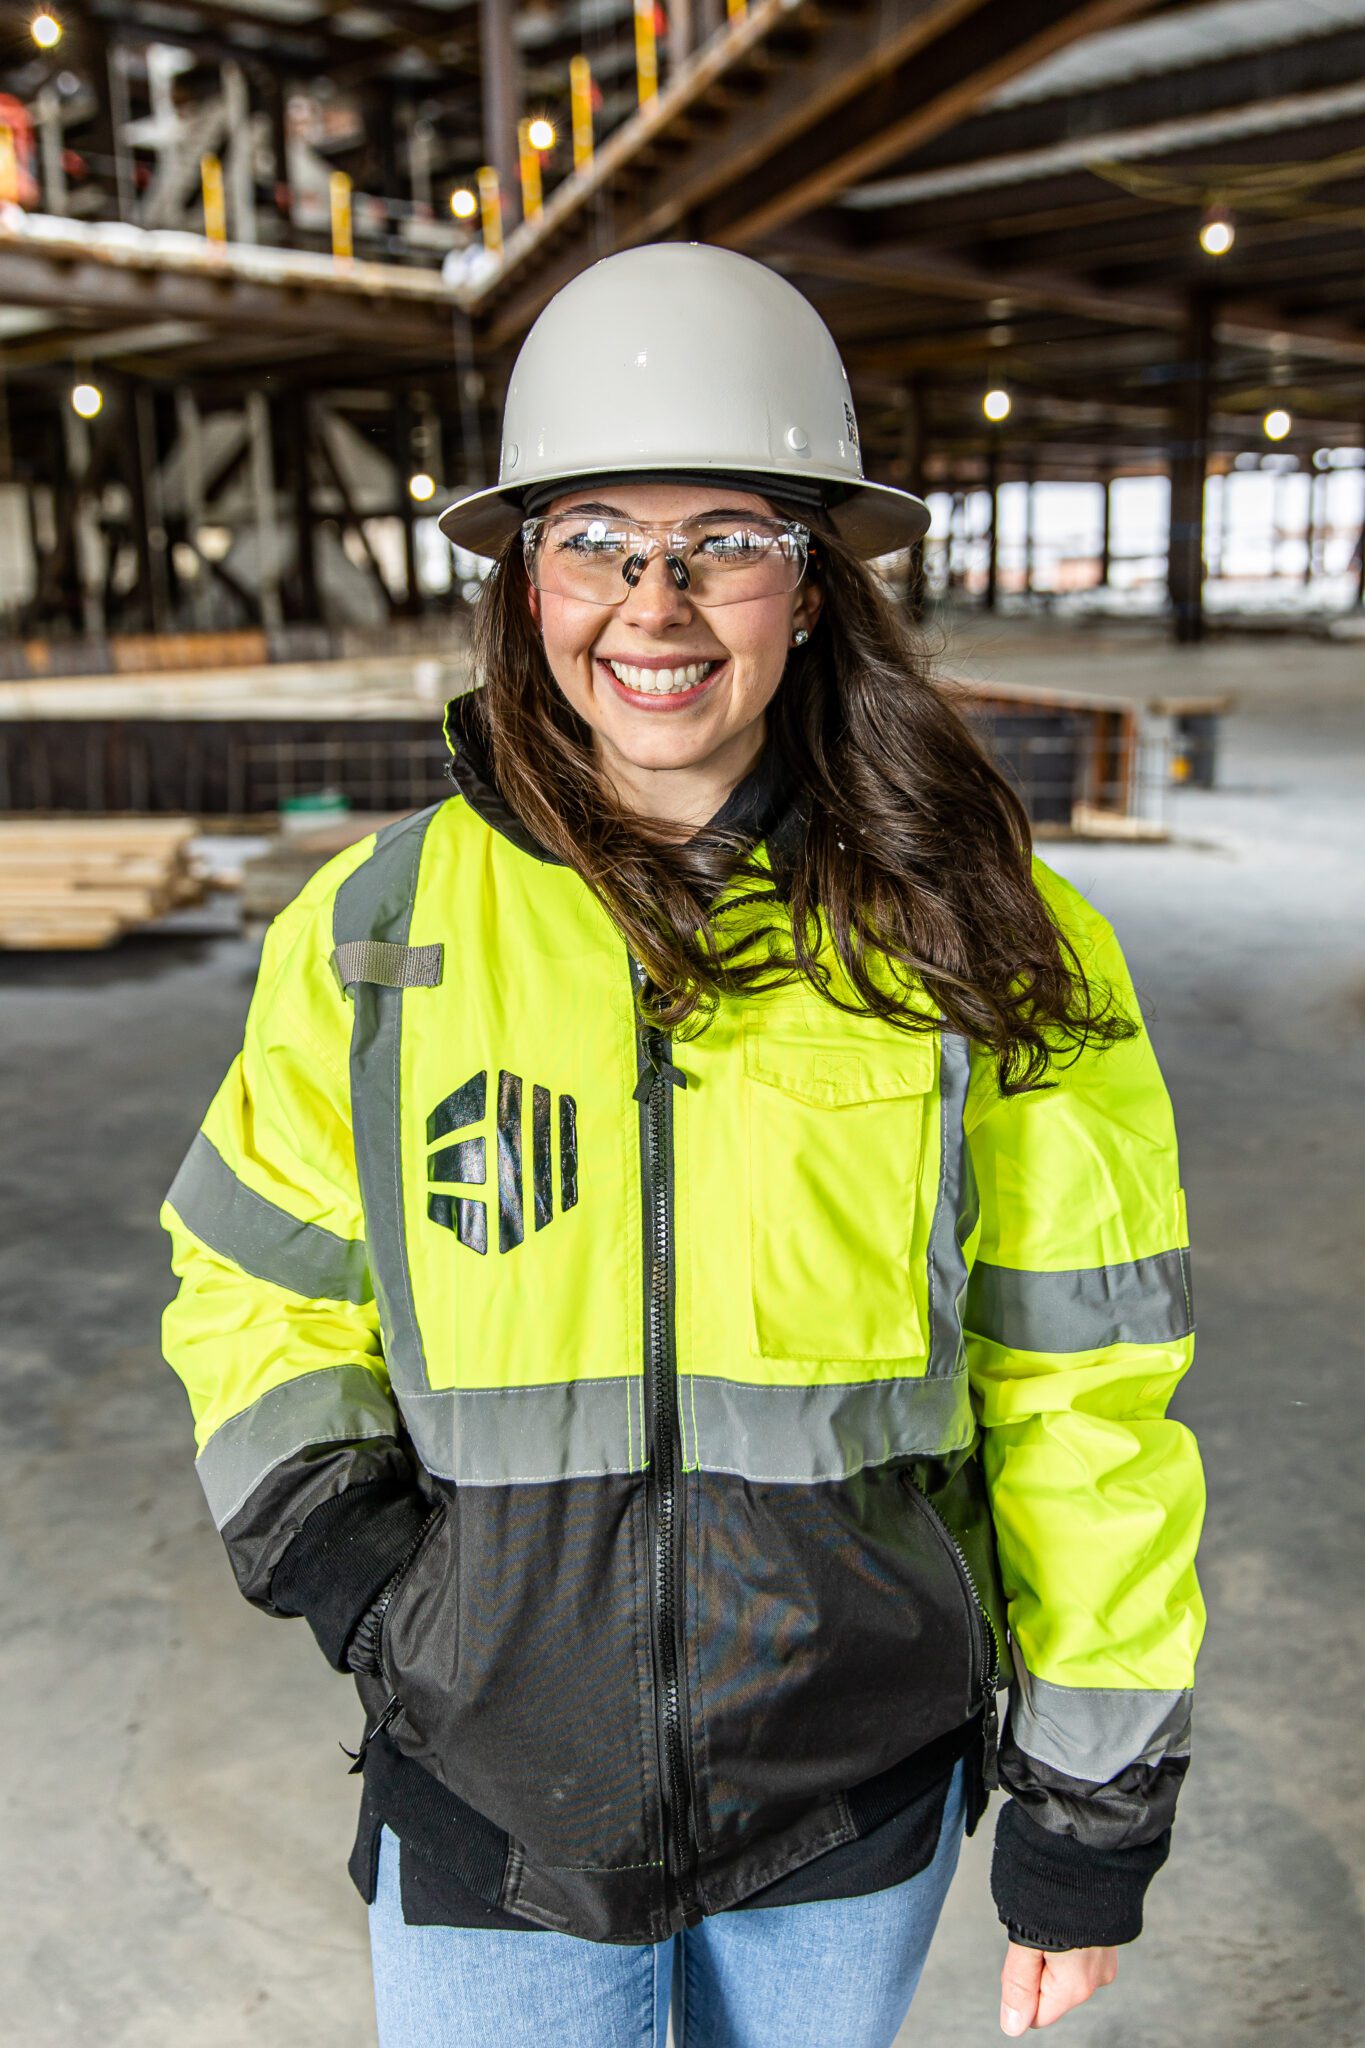 Senior Project Engineer Bailey Delucia, Women in Construction, Ford, Dearborn, Michigan